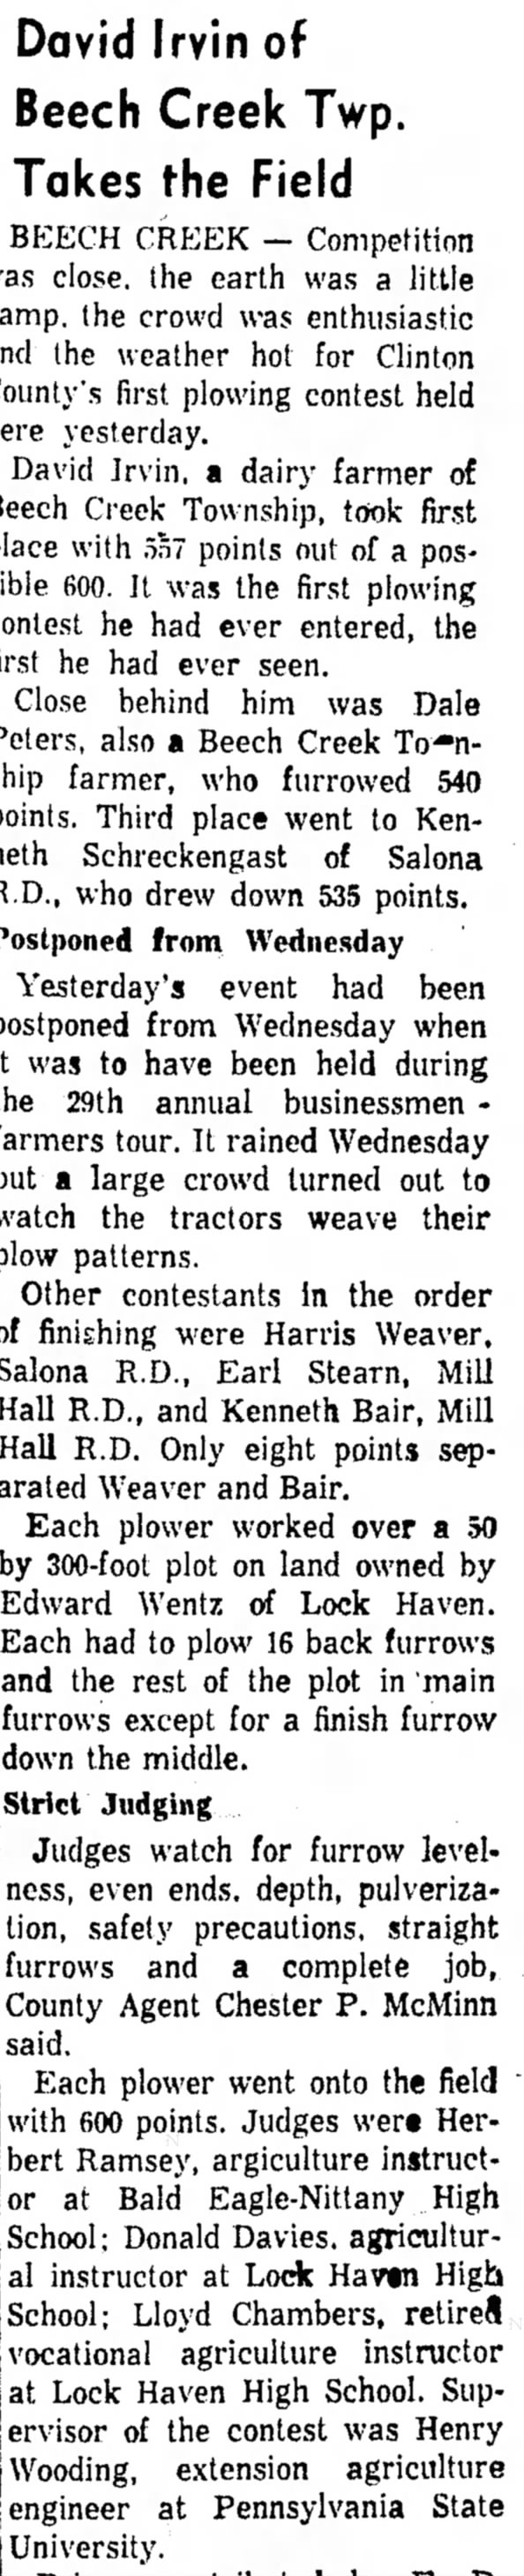 Wentz, uses his land for plowing contest  1958